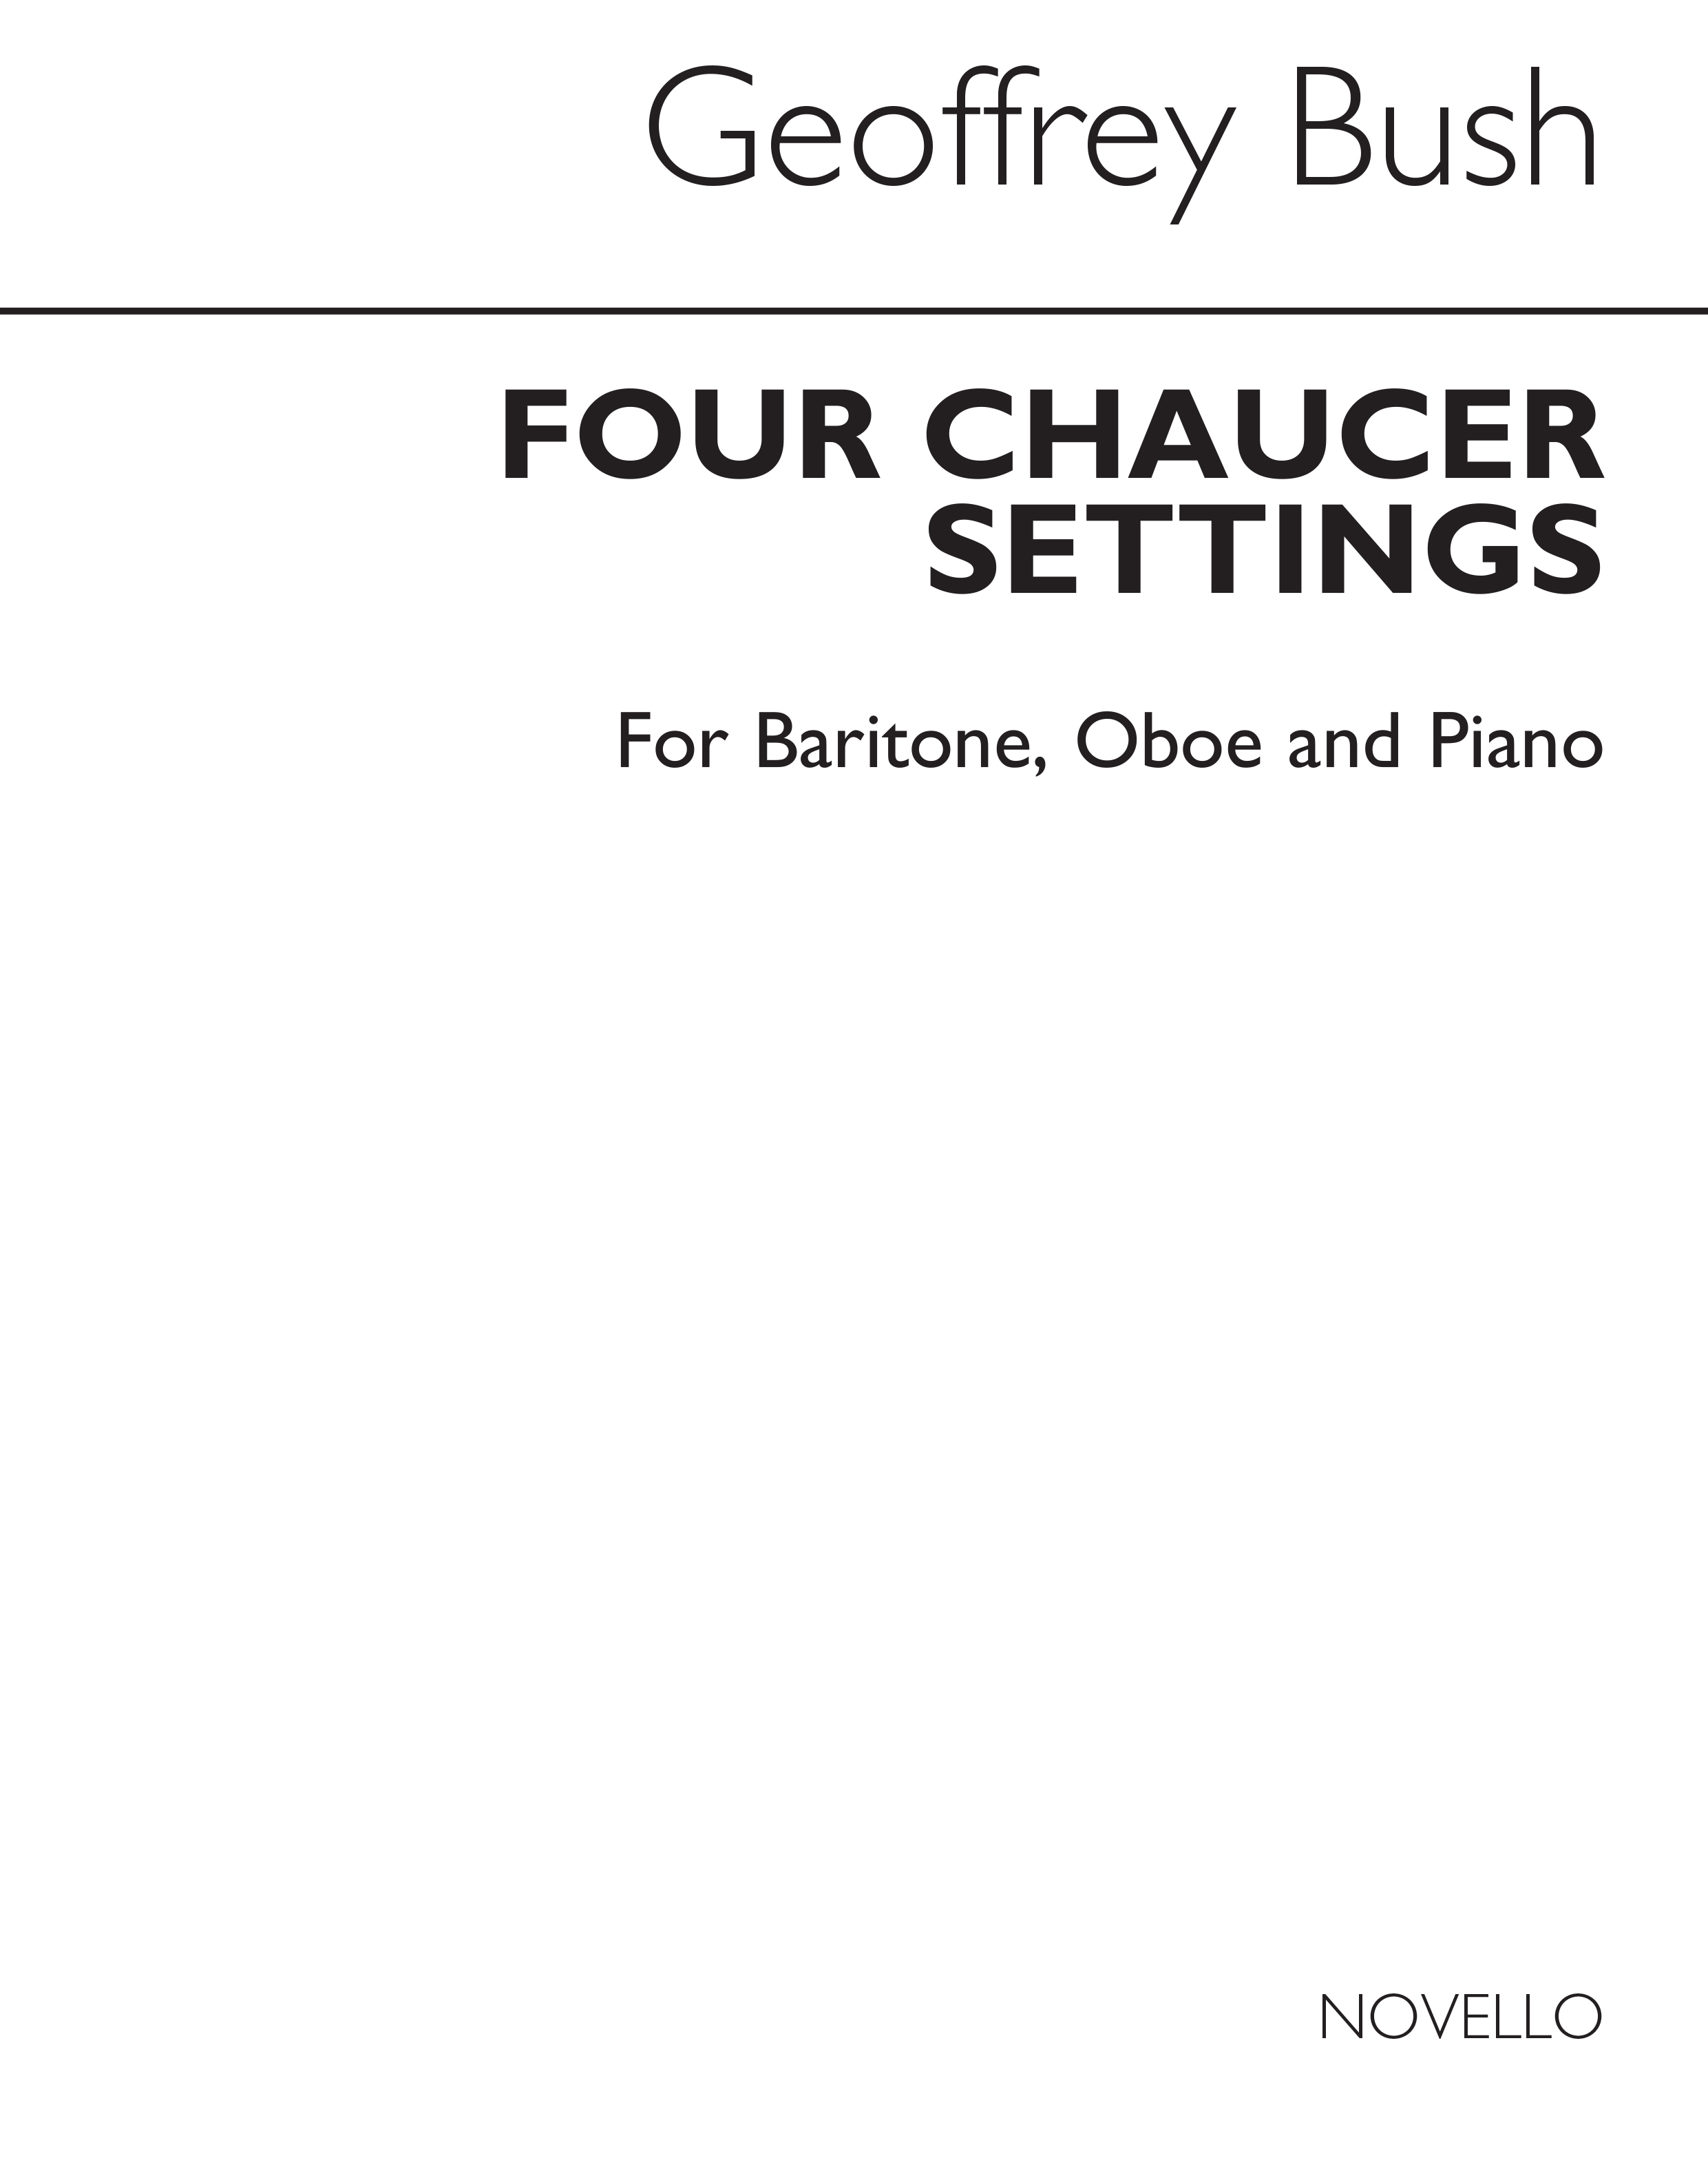 Bush: Four Chaucer Settings for Baritone, Oboe and Piano